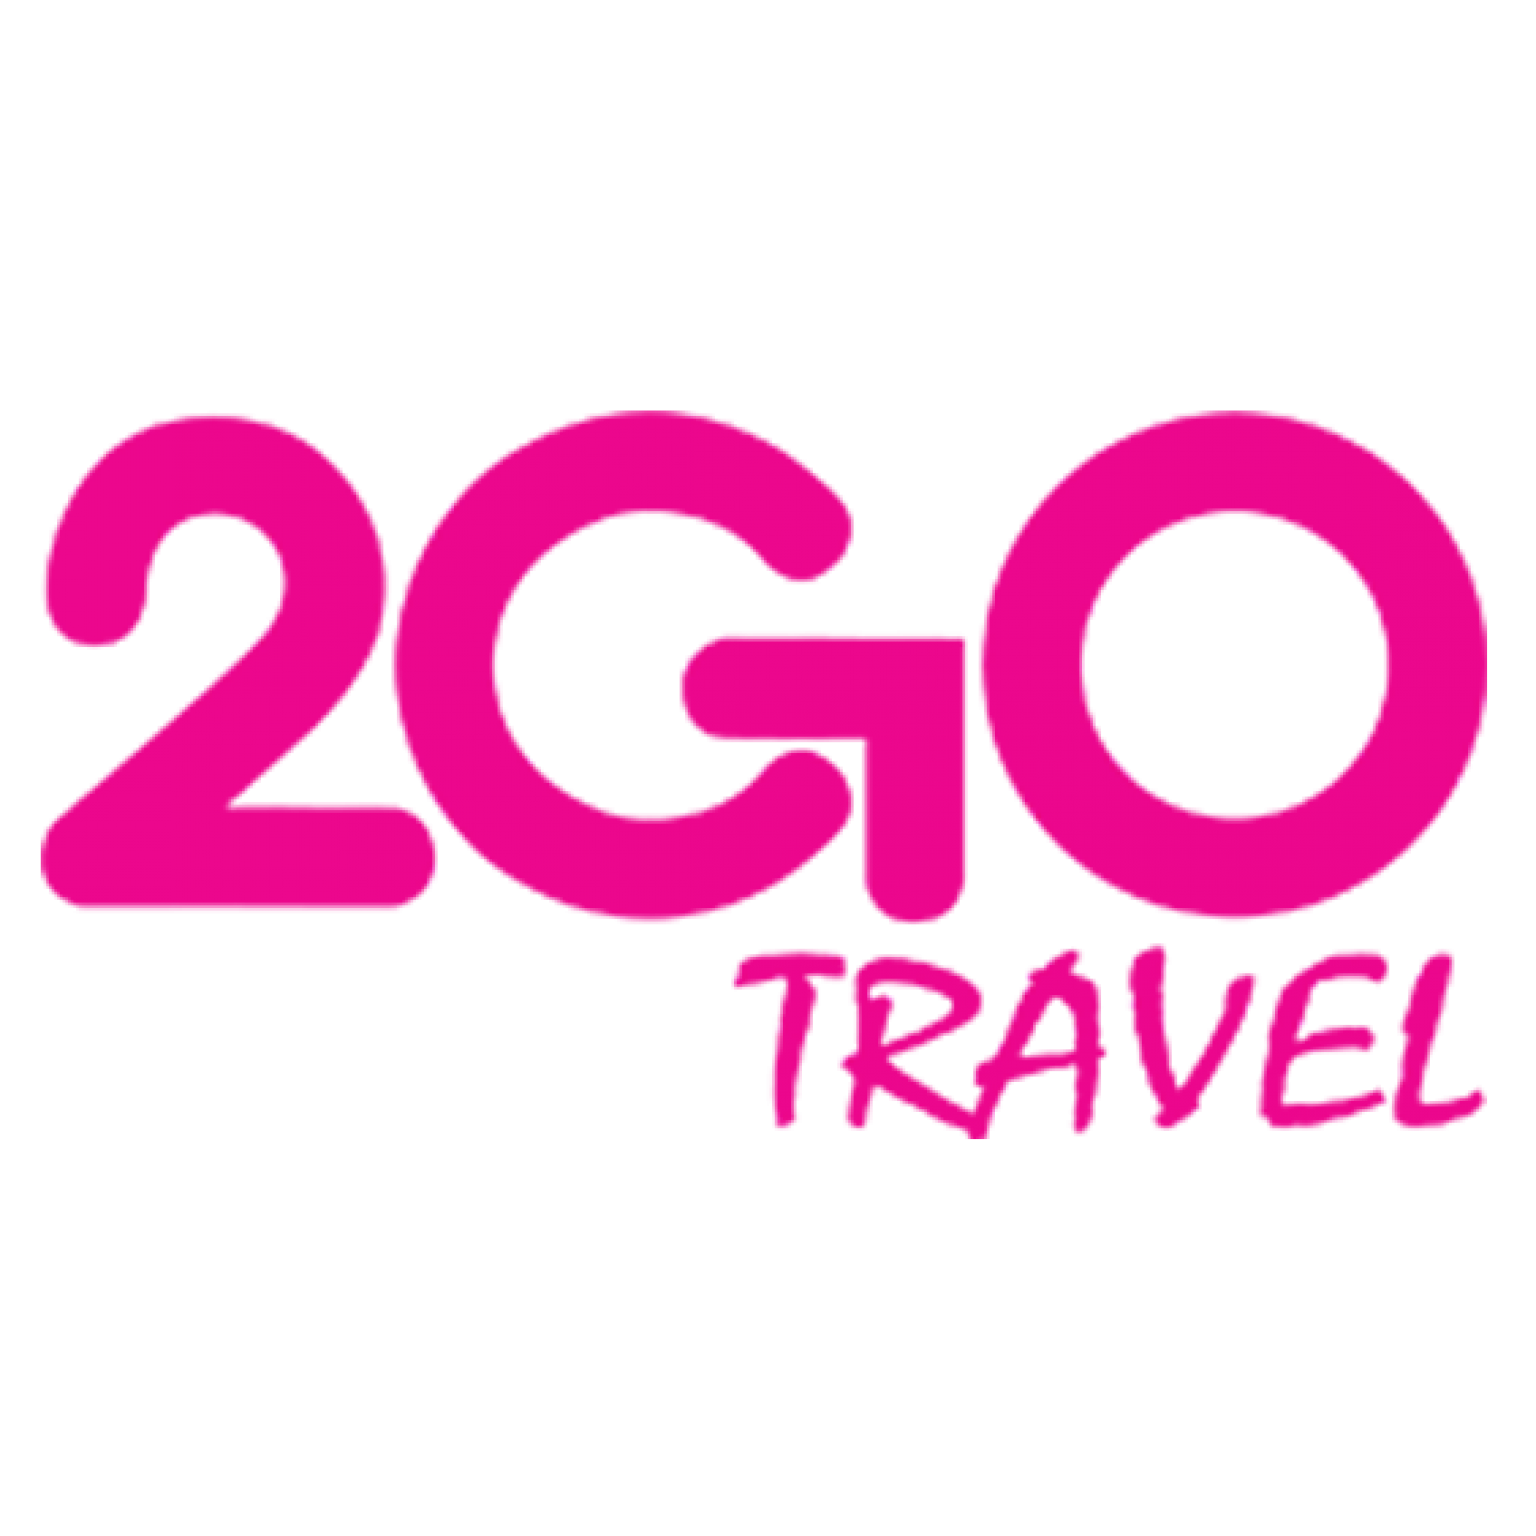 2go travel services offered